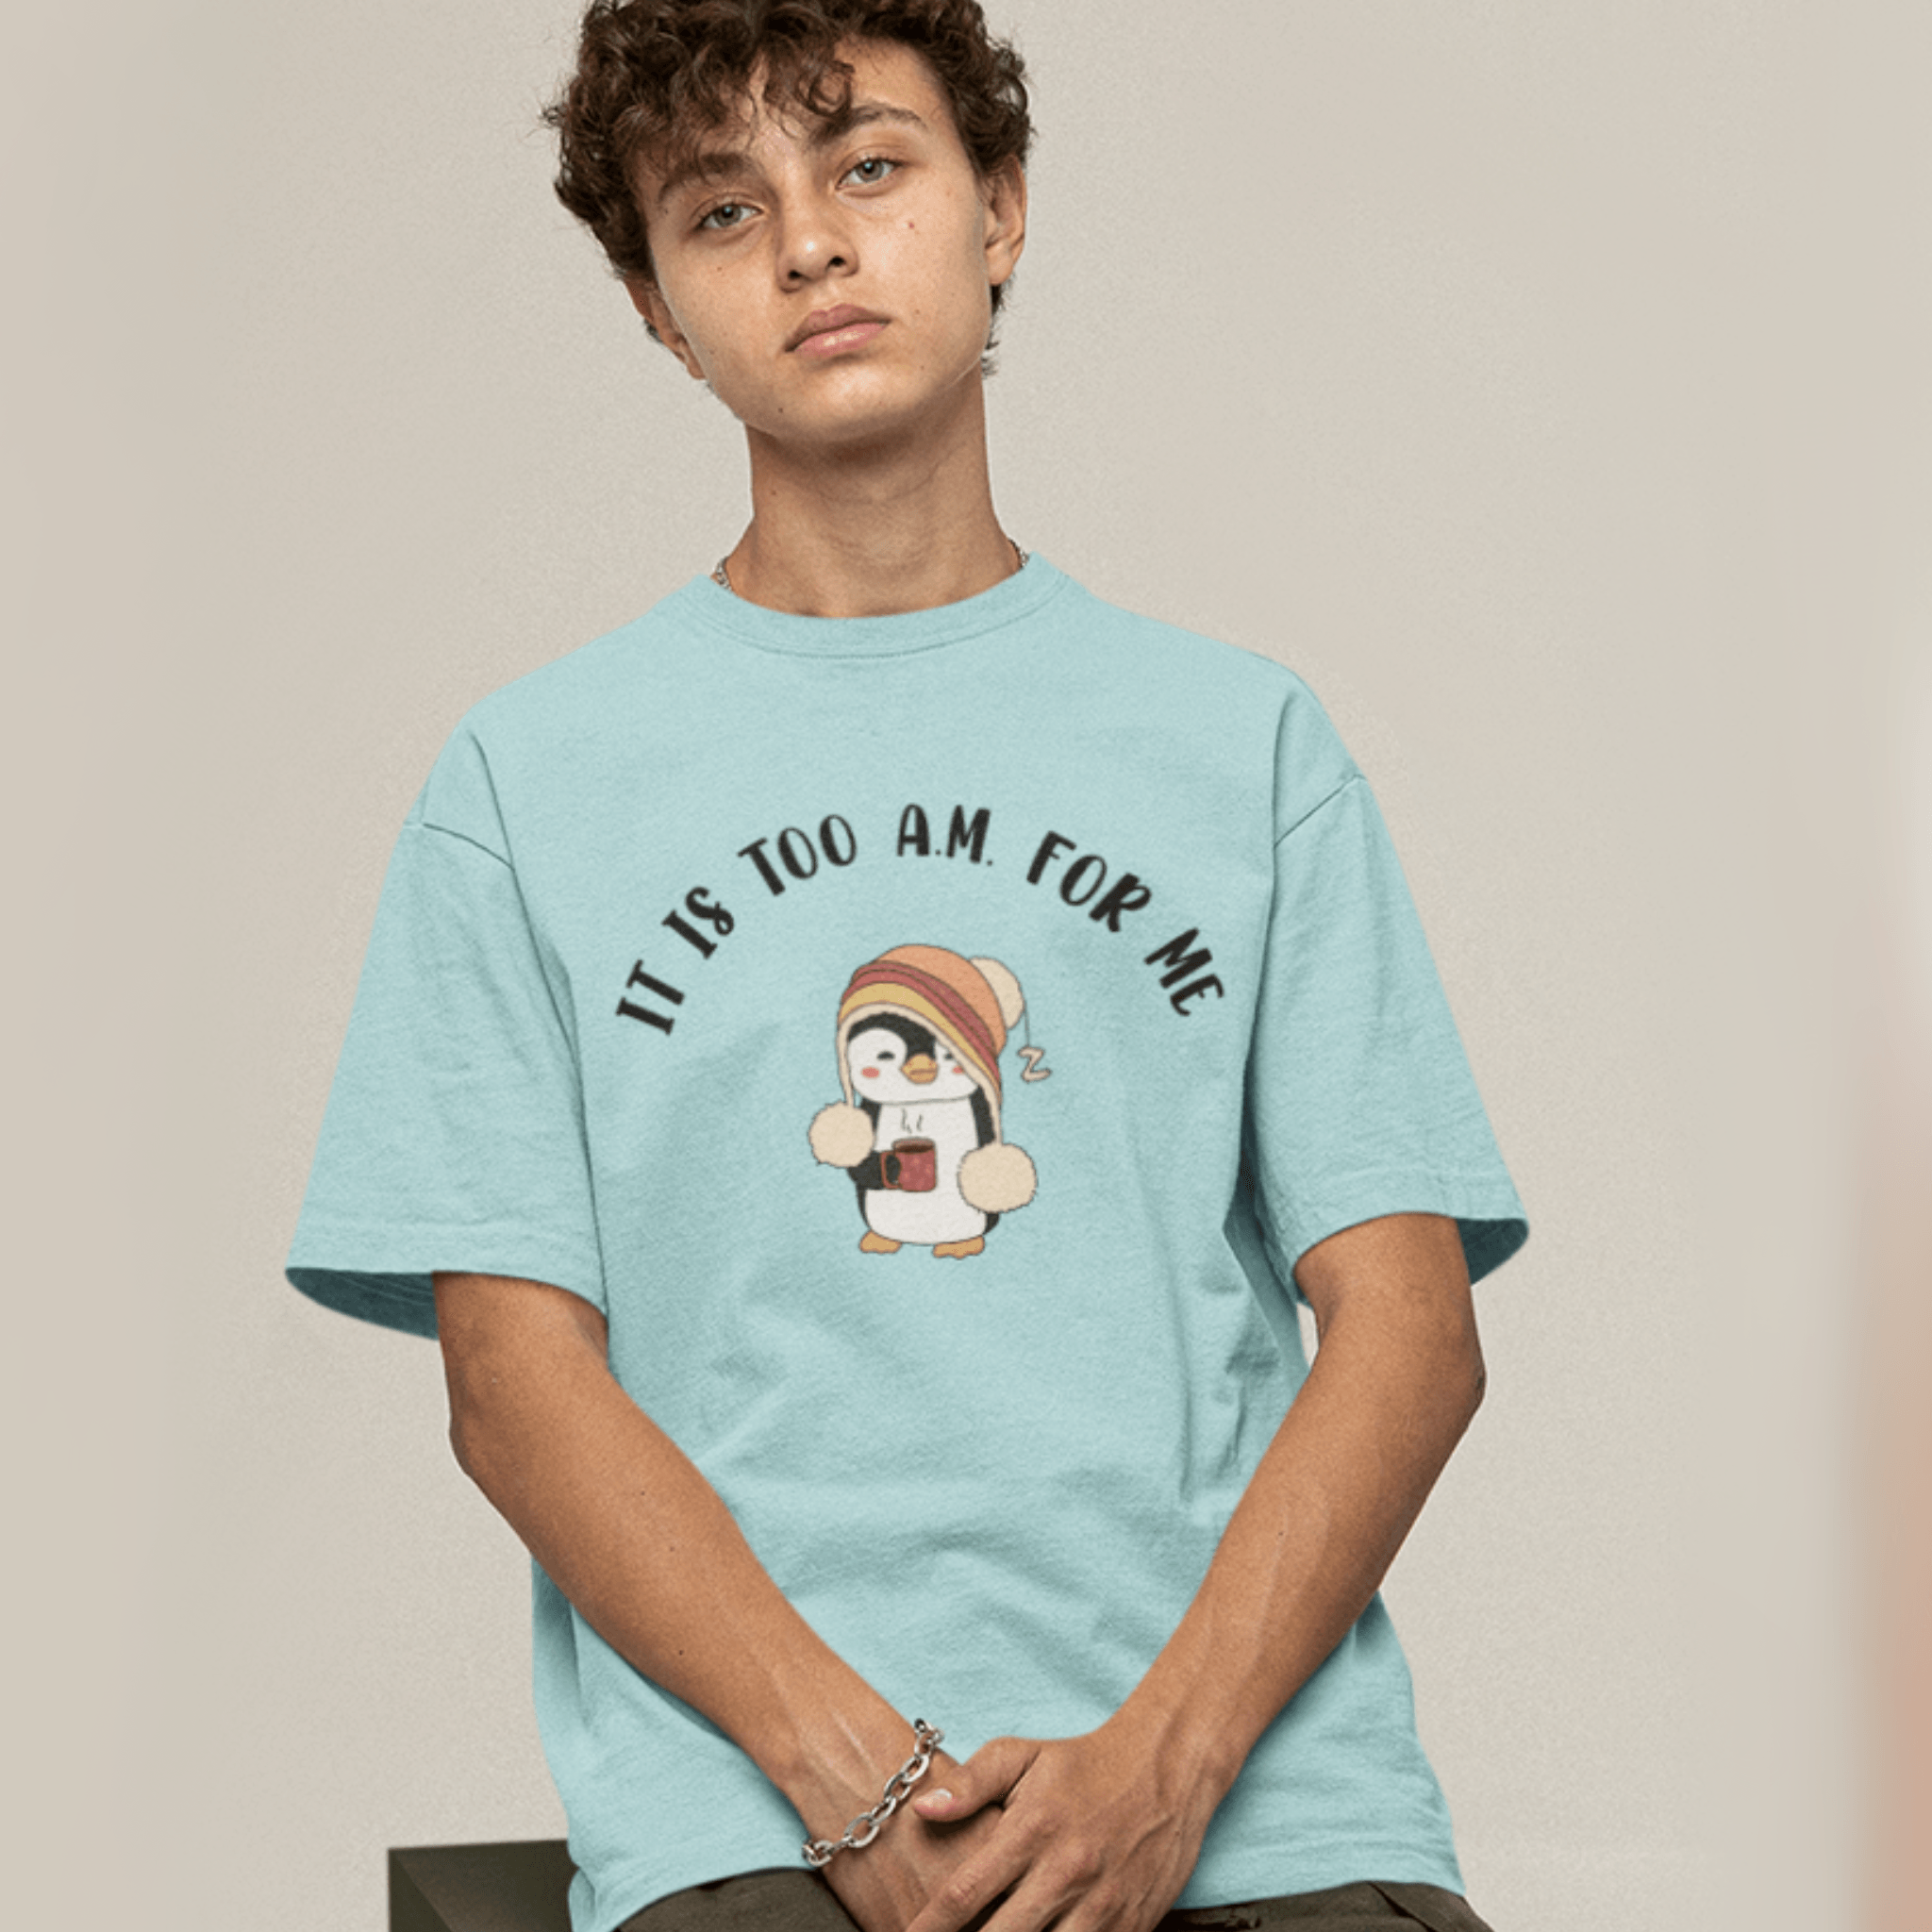 Too A.M. For Me Oversized T-shirts - Unisex - Cute Stuff India